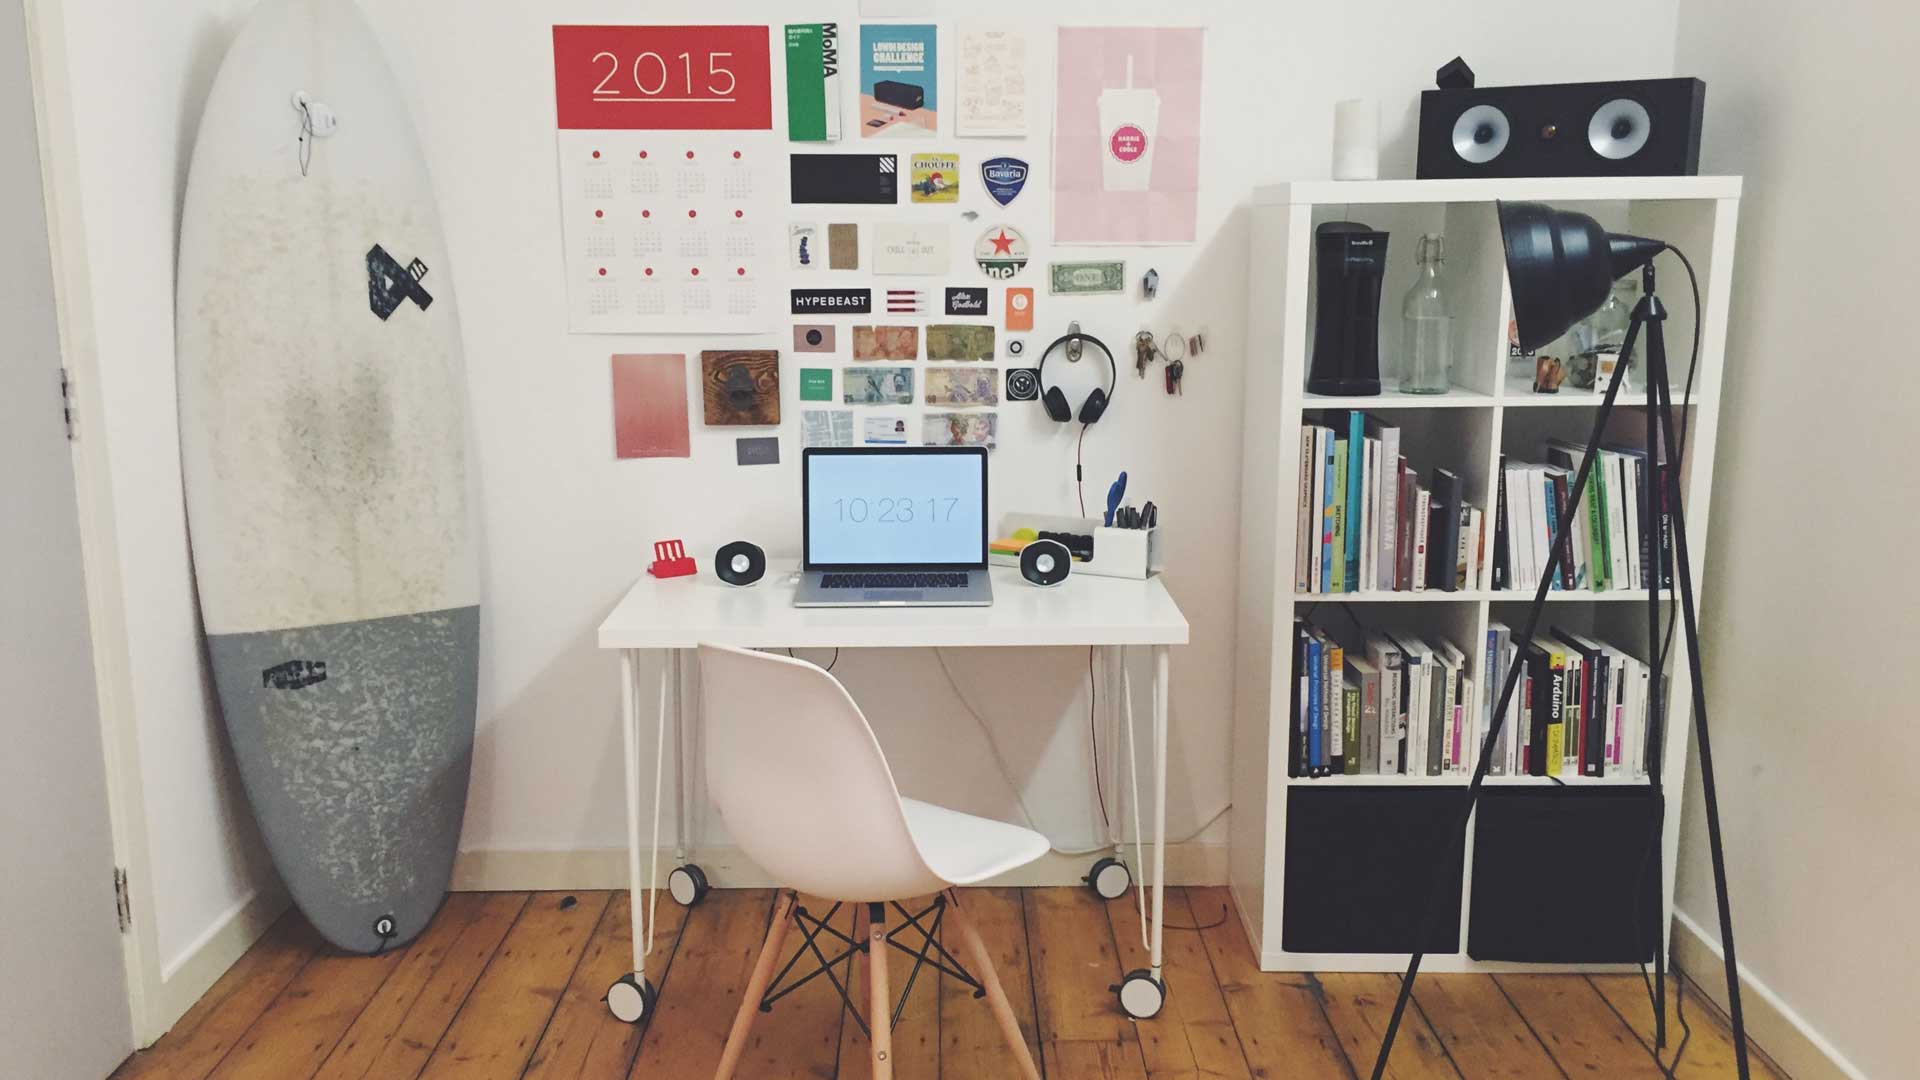 How to Keep Your Desk Organized in Some Simple Ways?